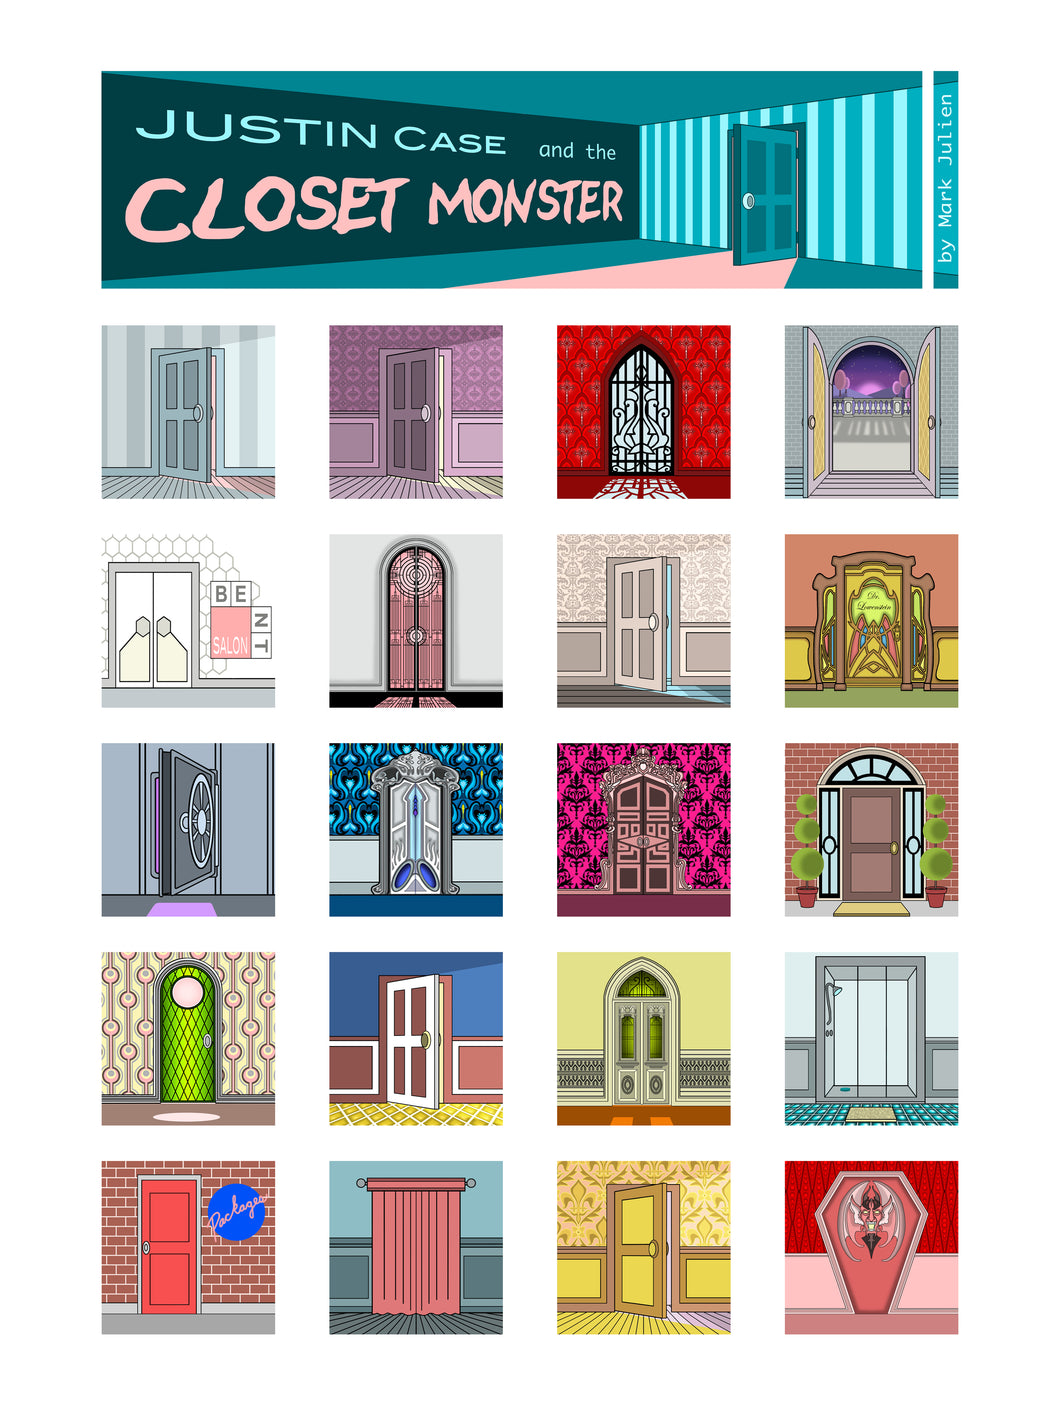 The Doors of Justin Case and the Closet Monster (Poster)